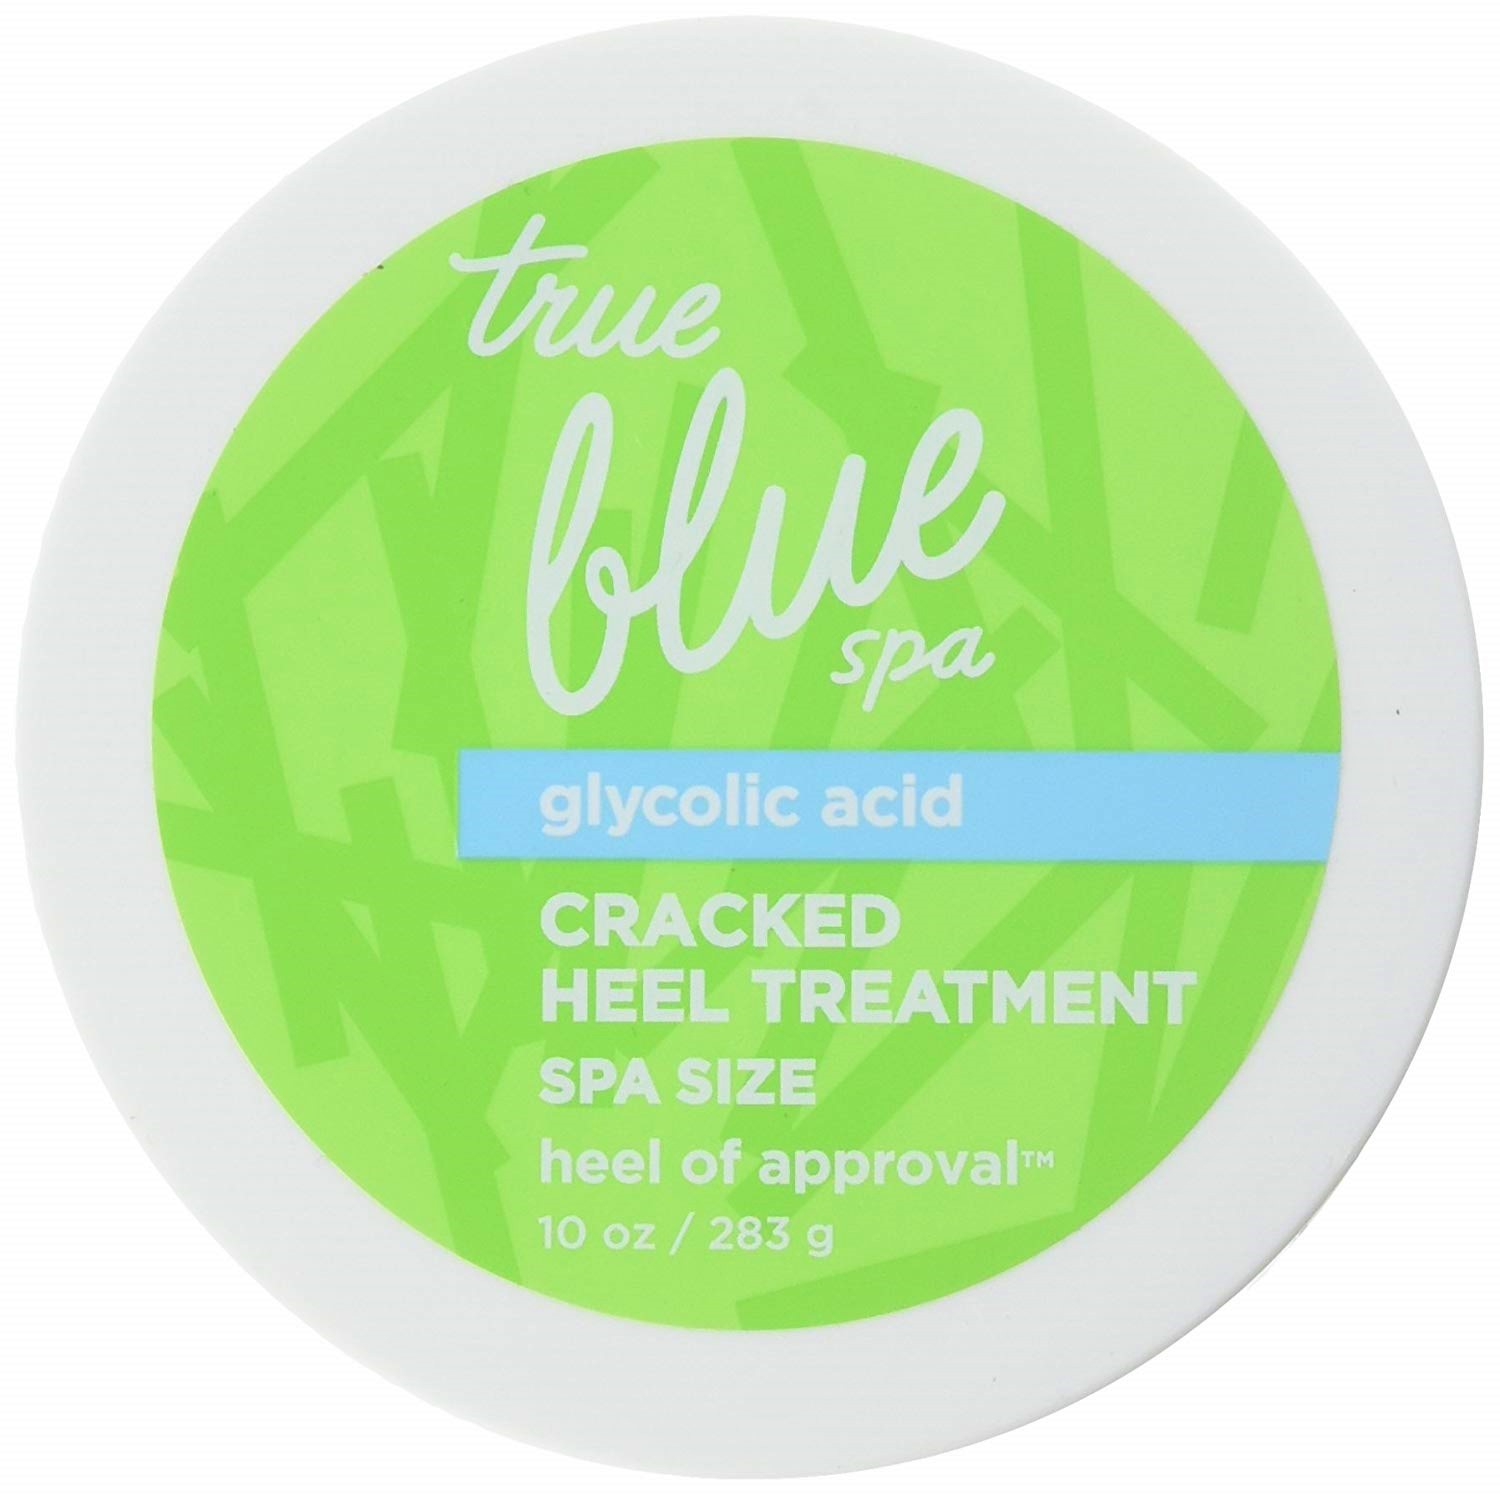 True Blue Spa made with glycolic acid.